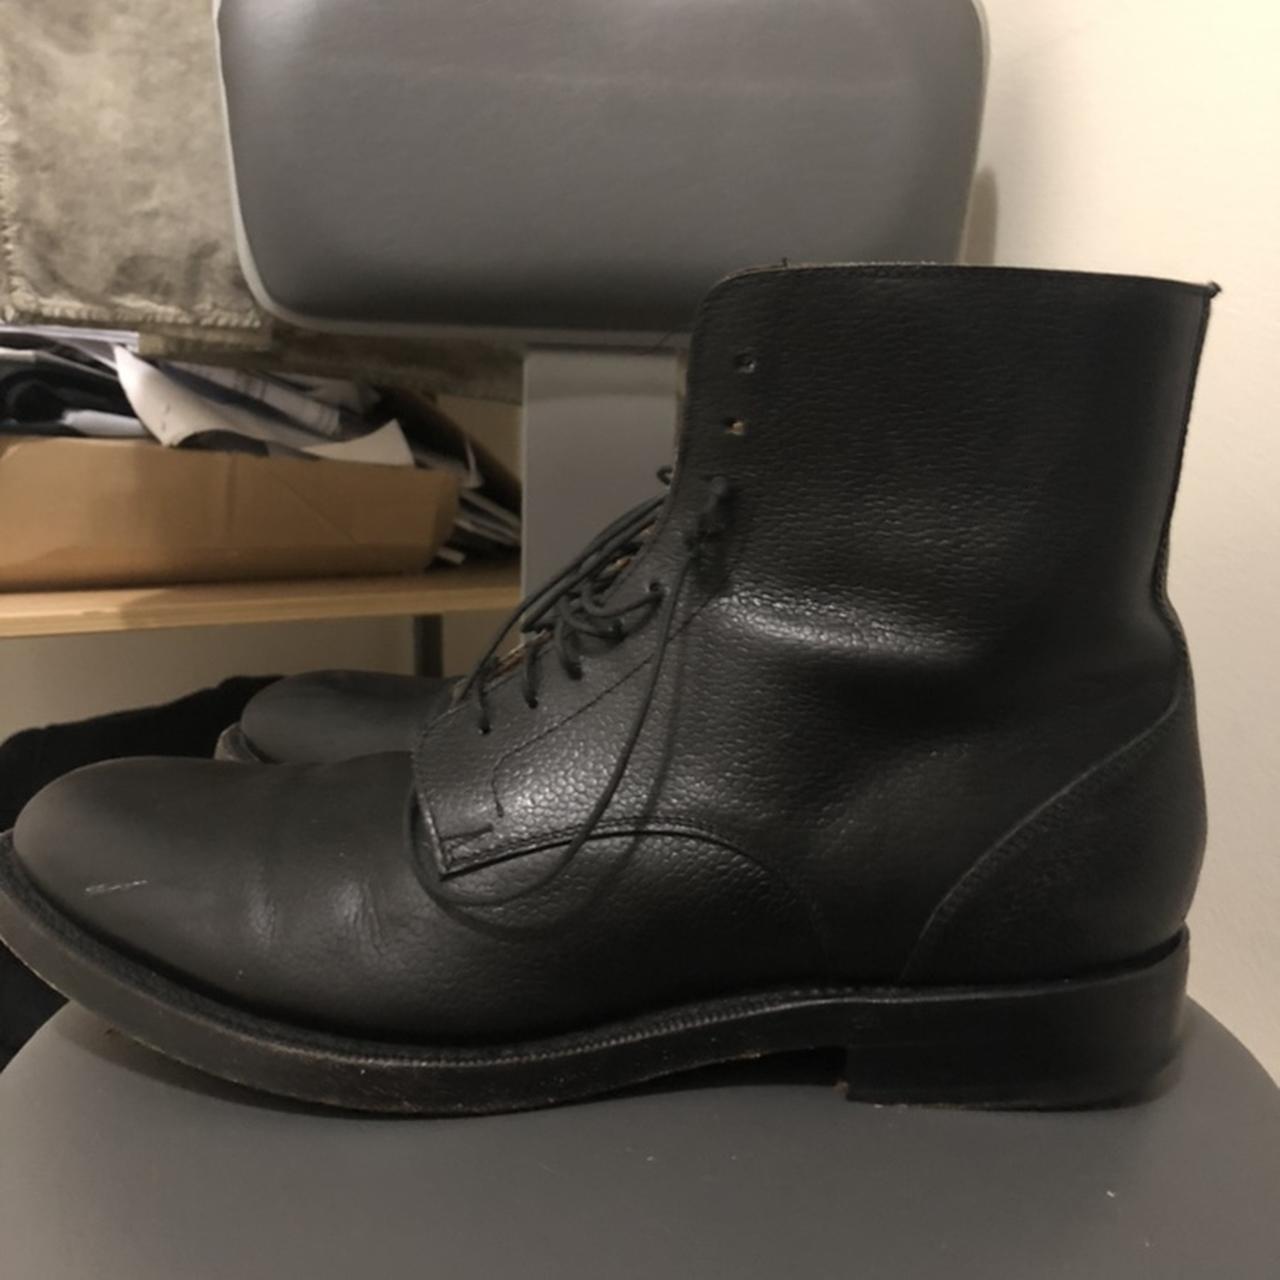 Raf pebbled leather combat boots. I don’t really... - Depop